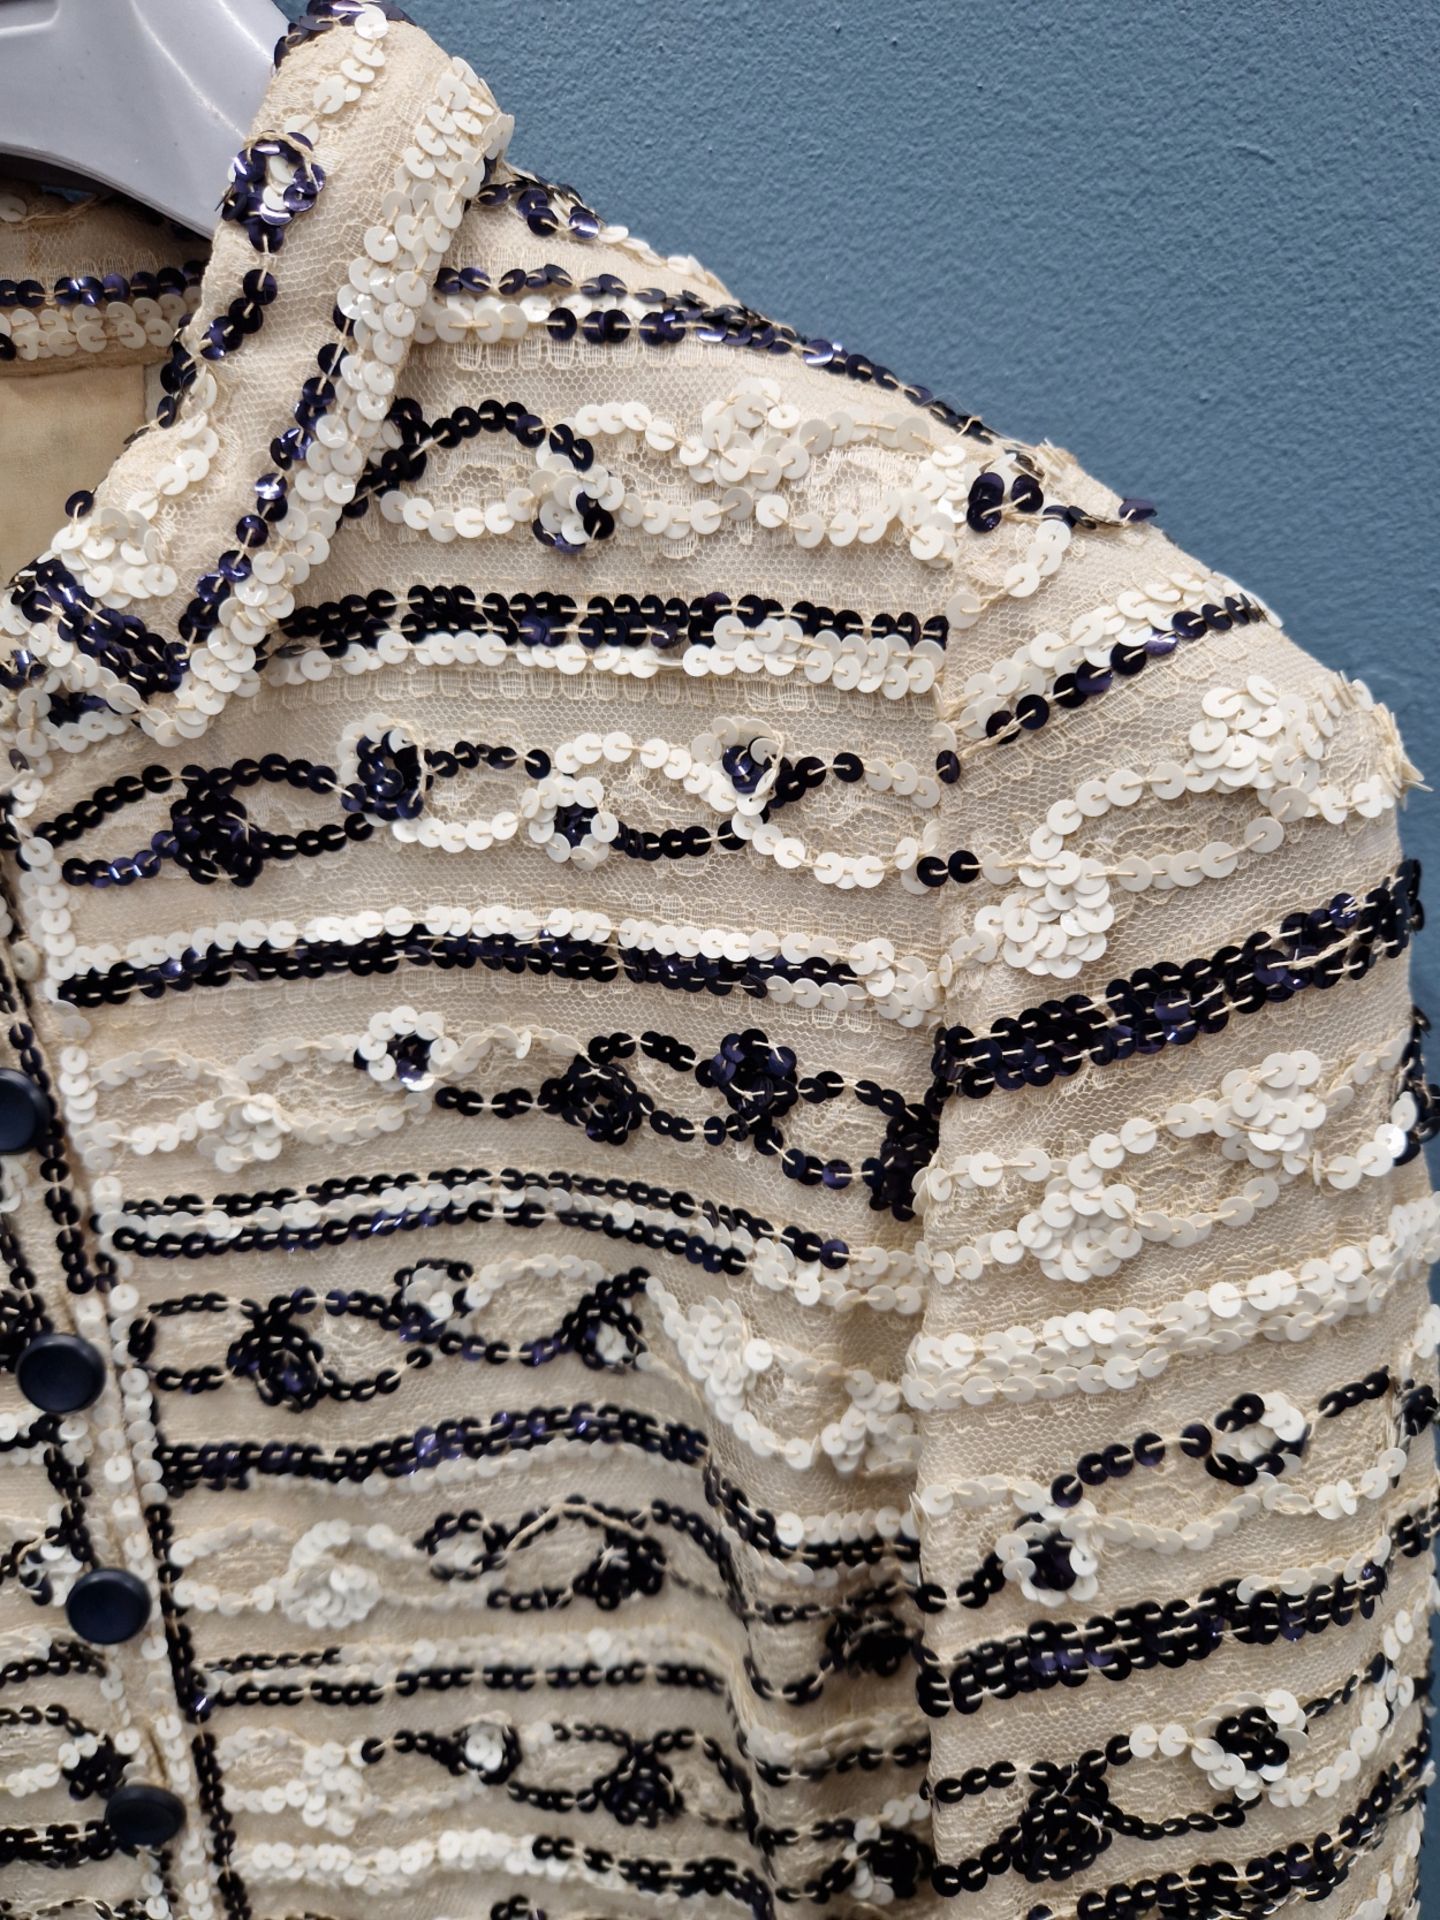 VINTAGE 1970's CHANEL HAUTE COUTURE EMBELLISHED SILK NAVY AND CREAM JACKET. PIT TO PIT 44.5cm - Image 17 of 31